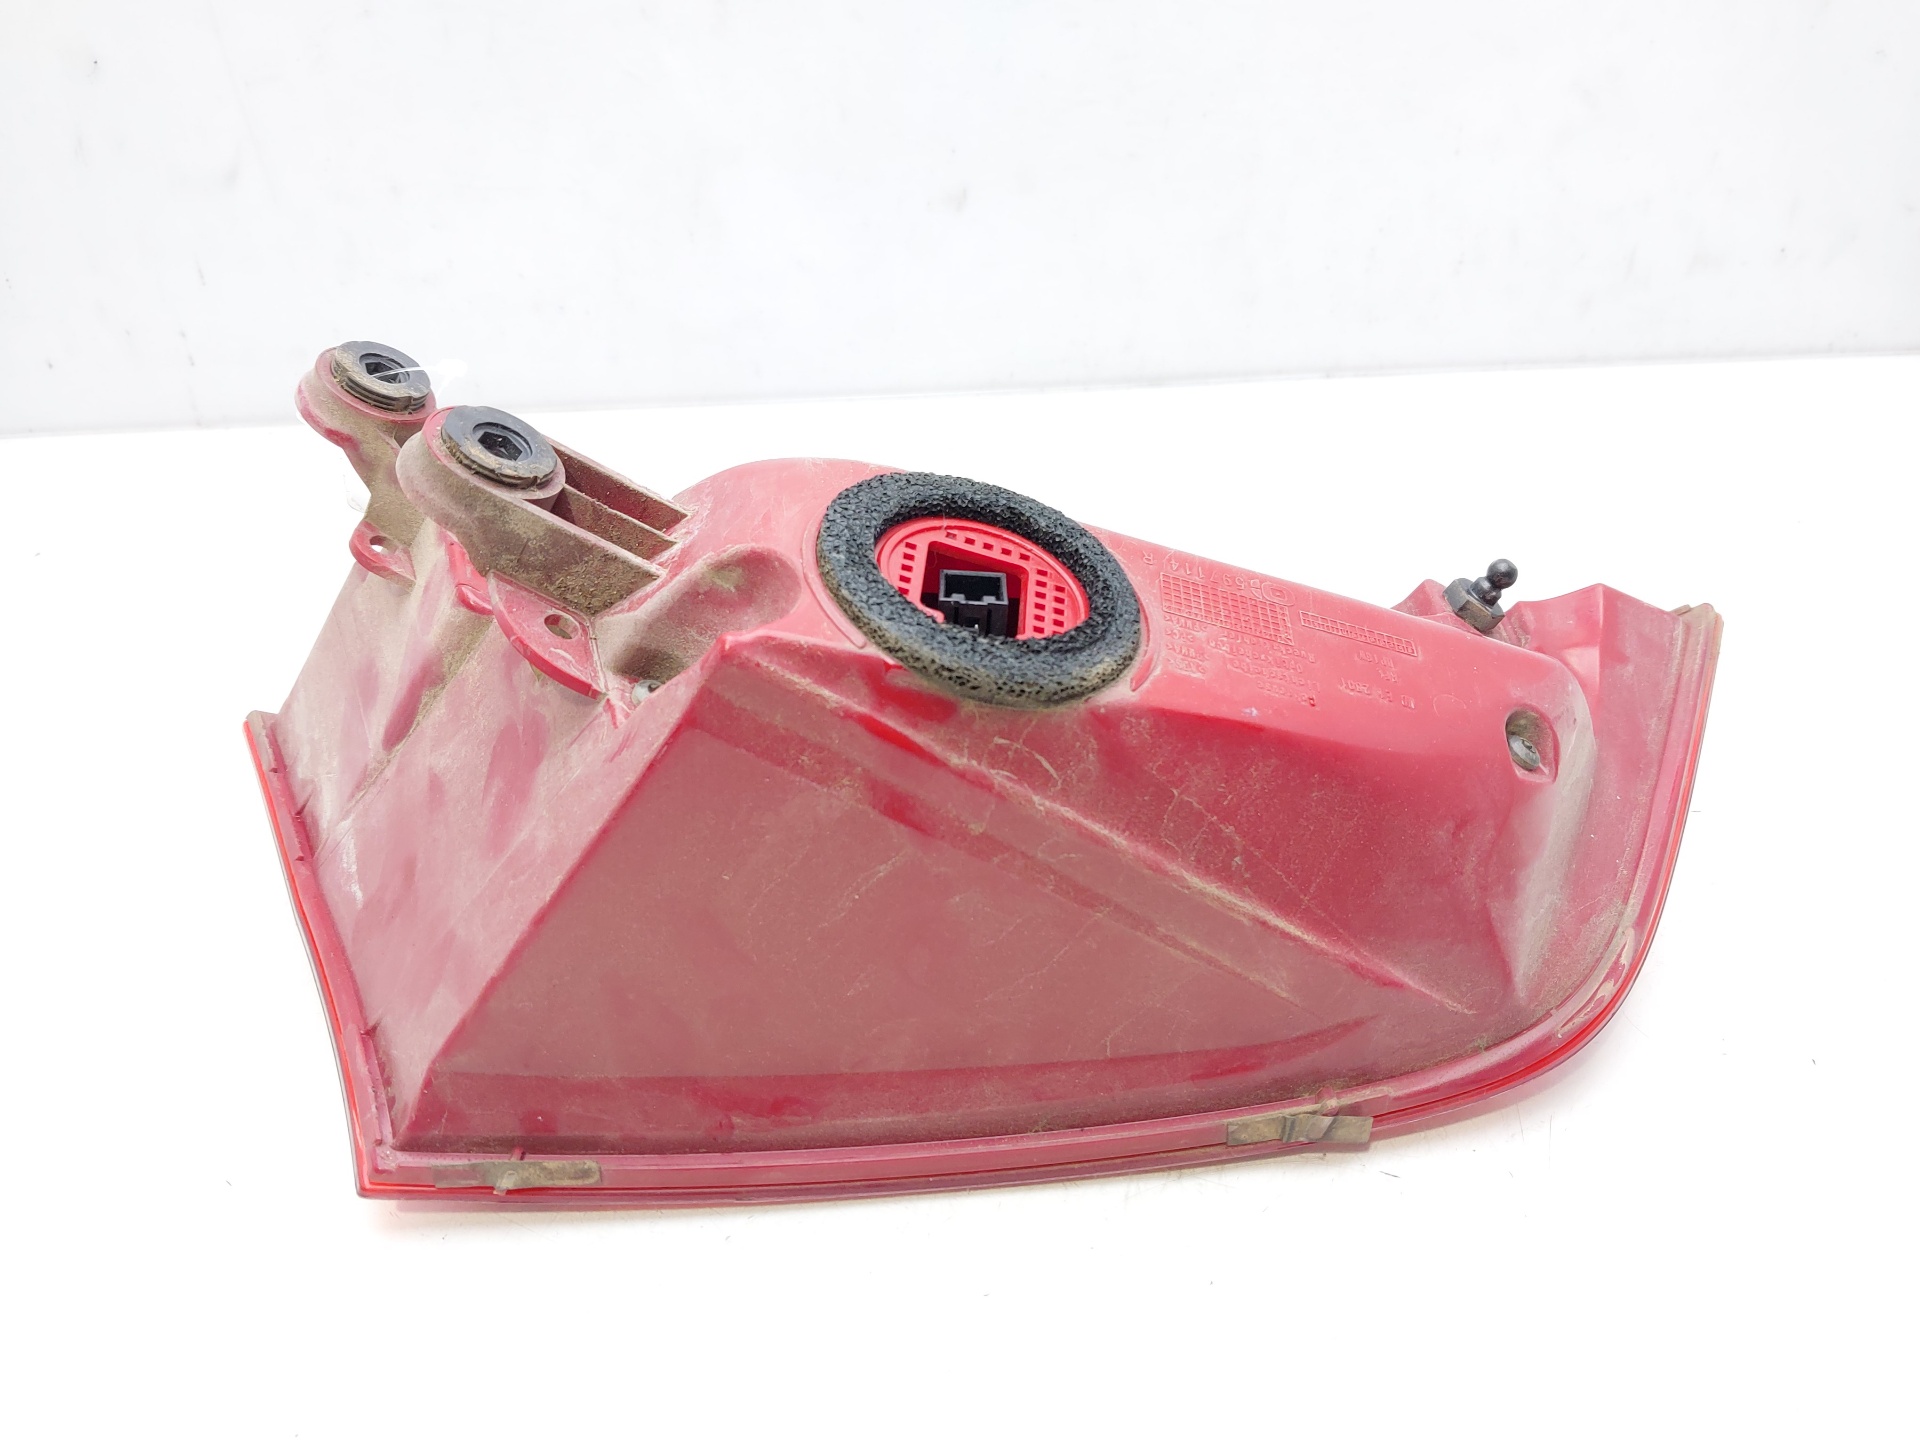 AUDI A7 C7/4G (2010-2020) Rear Right Taillight Lamp 4G8945096 21086003